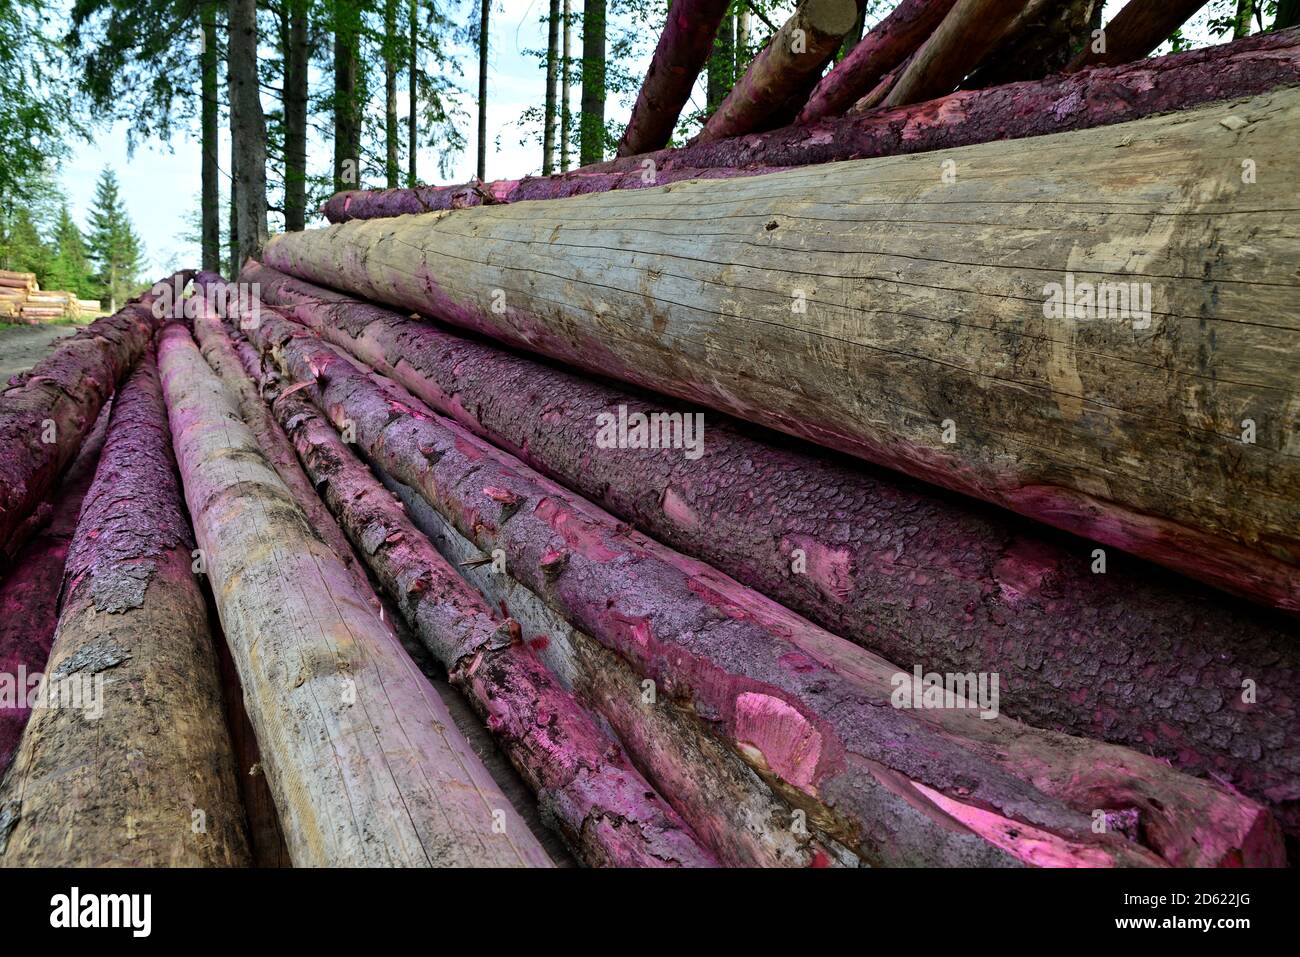 A pile of sawn wood in the middle of the forest. Background with green trees and blue sky with white clouds. Bark beetle calamities in mountain forest Stock Photo